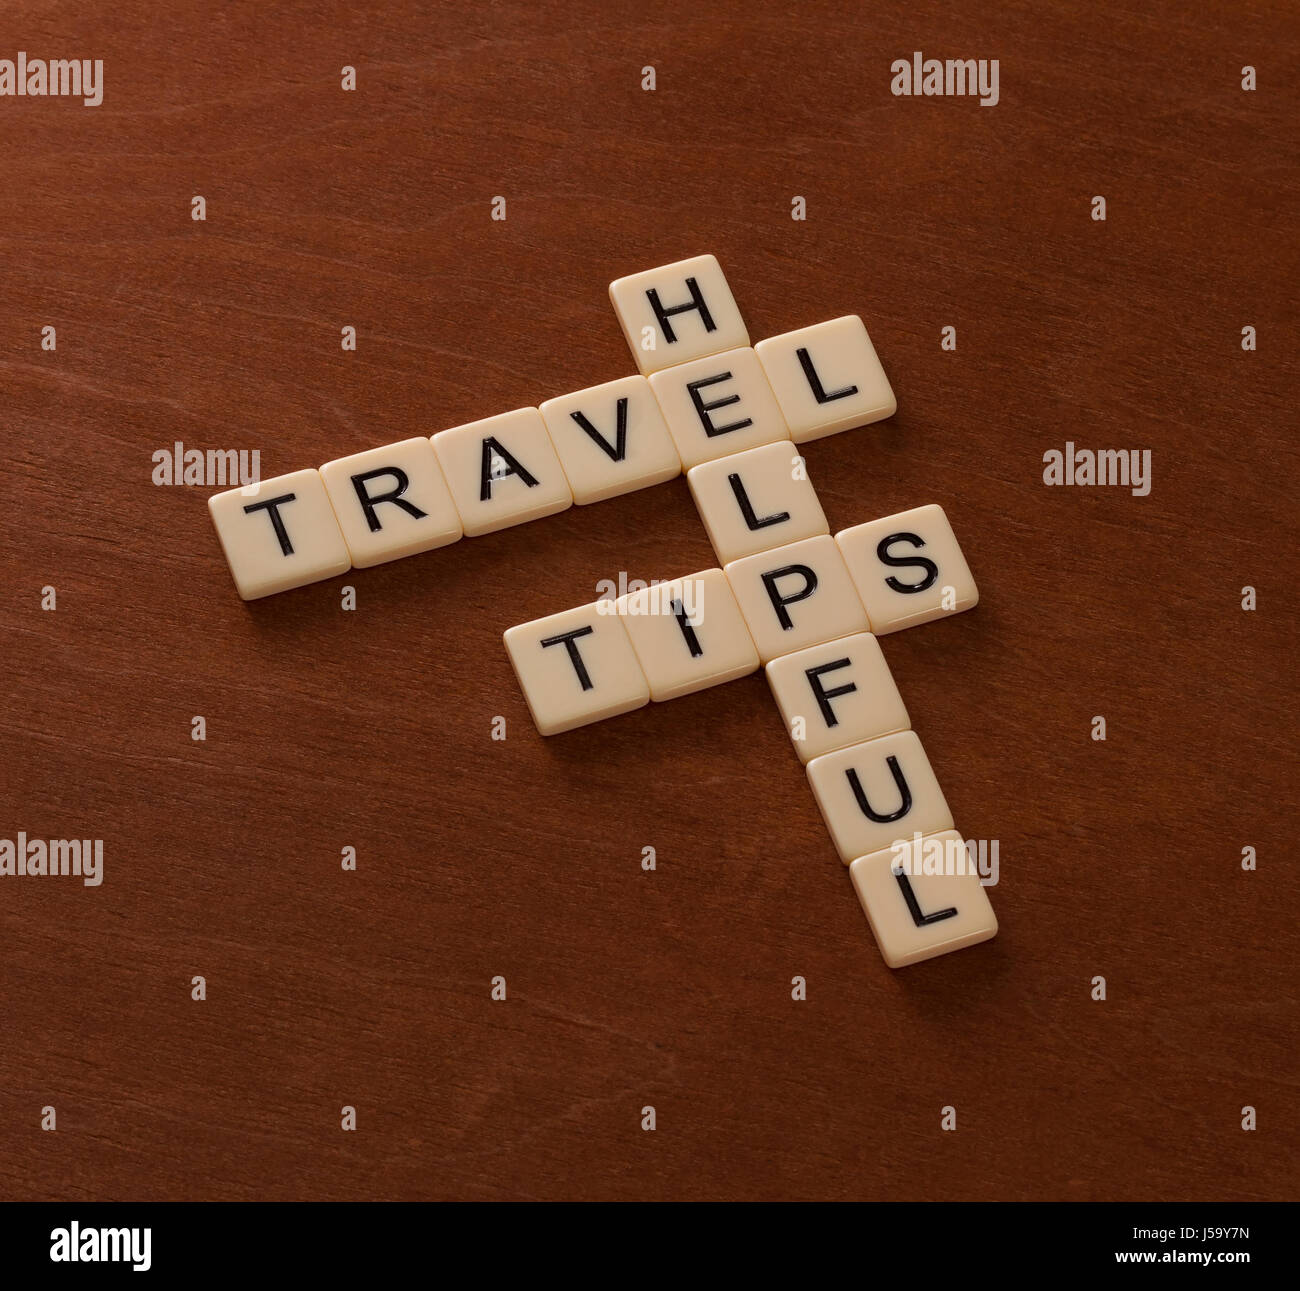 Crossword puzzle with words Helpful Travel Tips. World travel concept. Ivory tiles with capital letters on mahogany board. Stock Photo